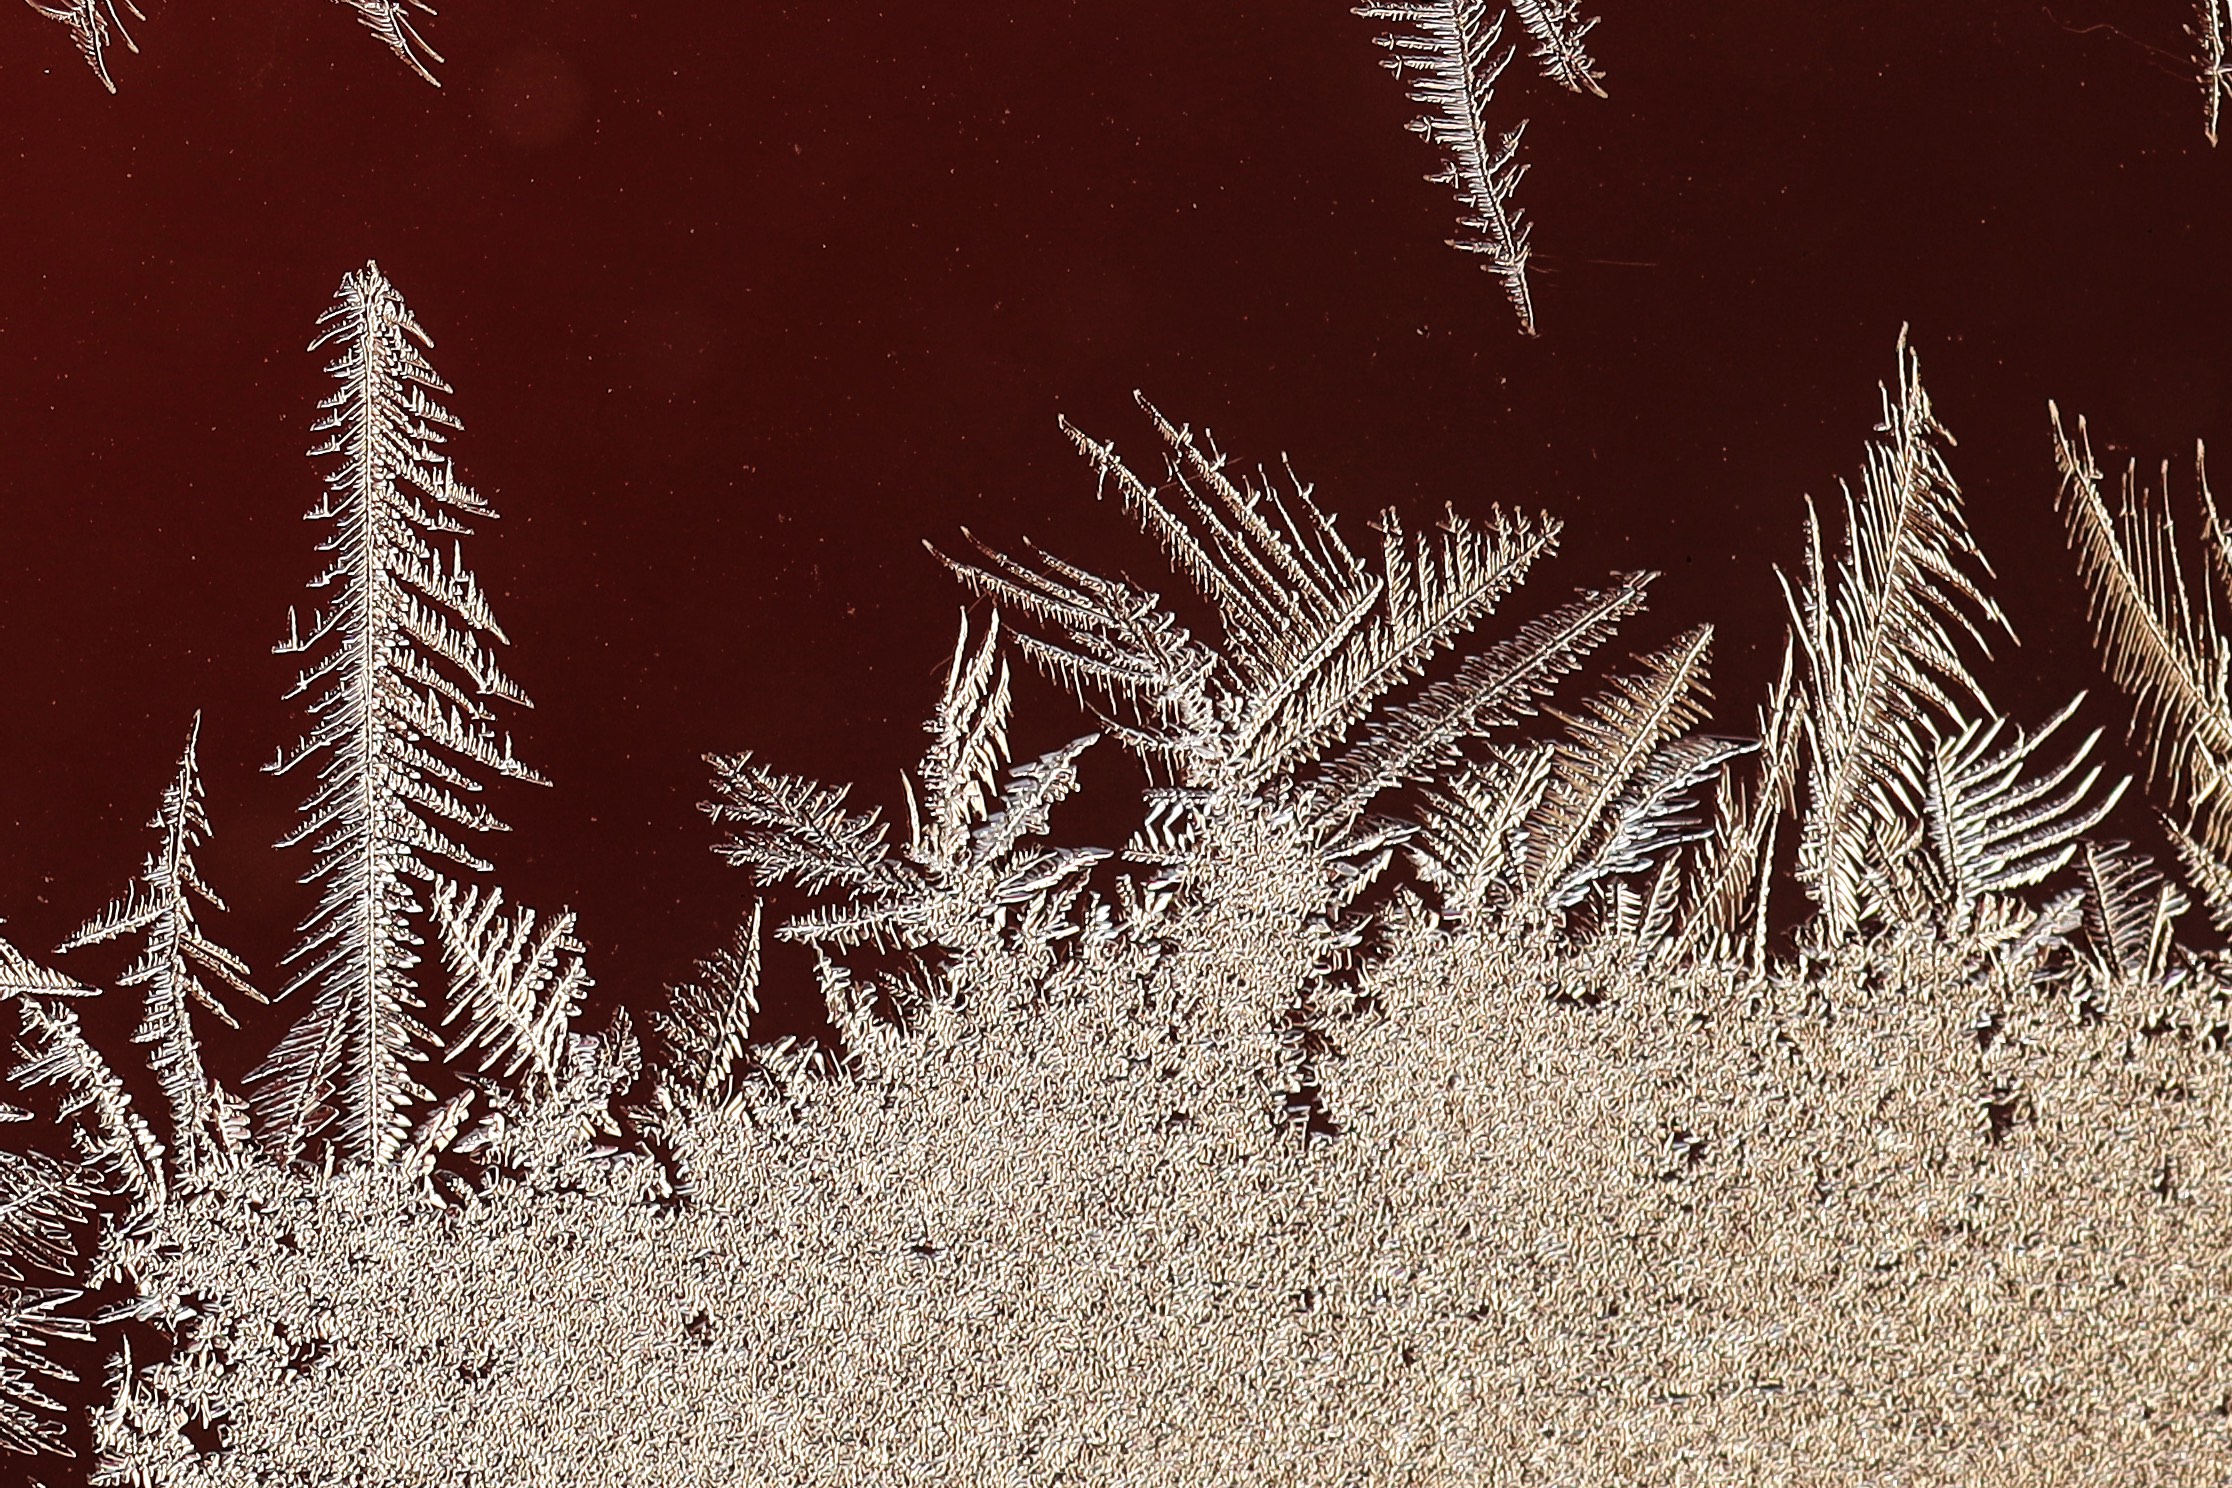 Video: How does frost form? - It's a chilly, crisp and frosty